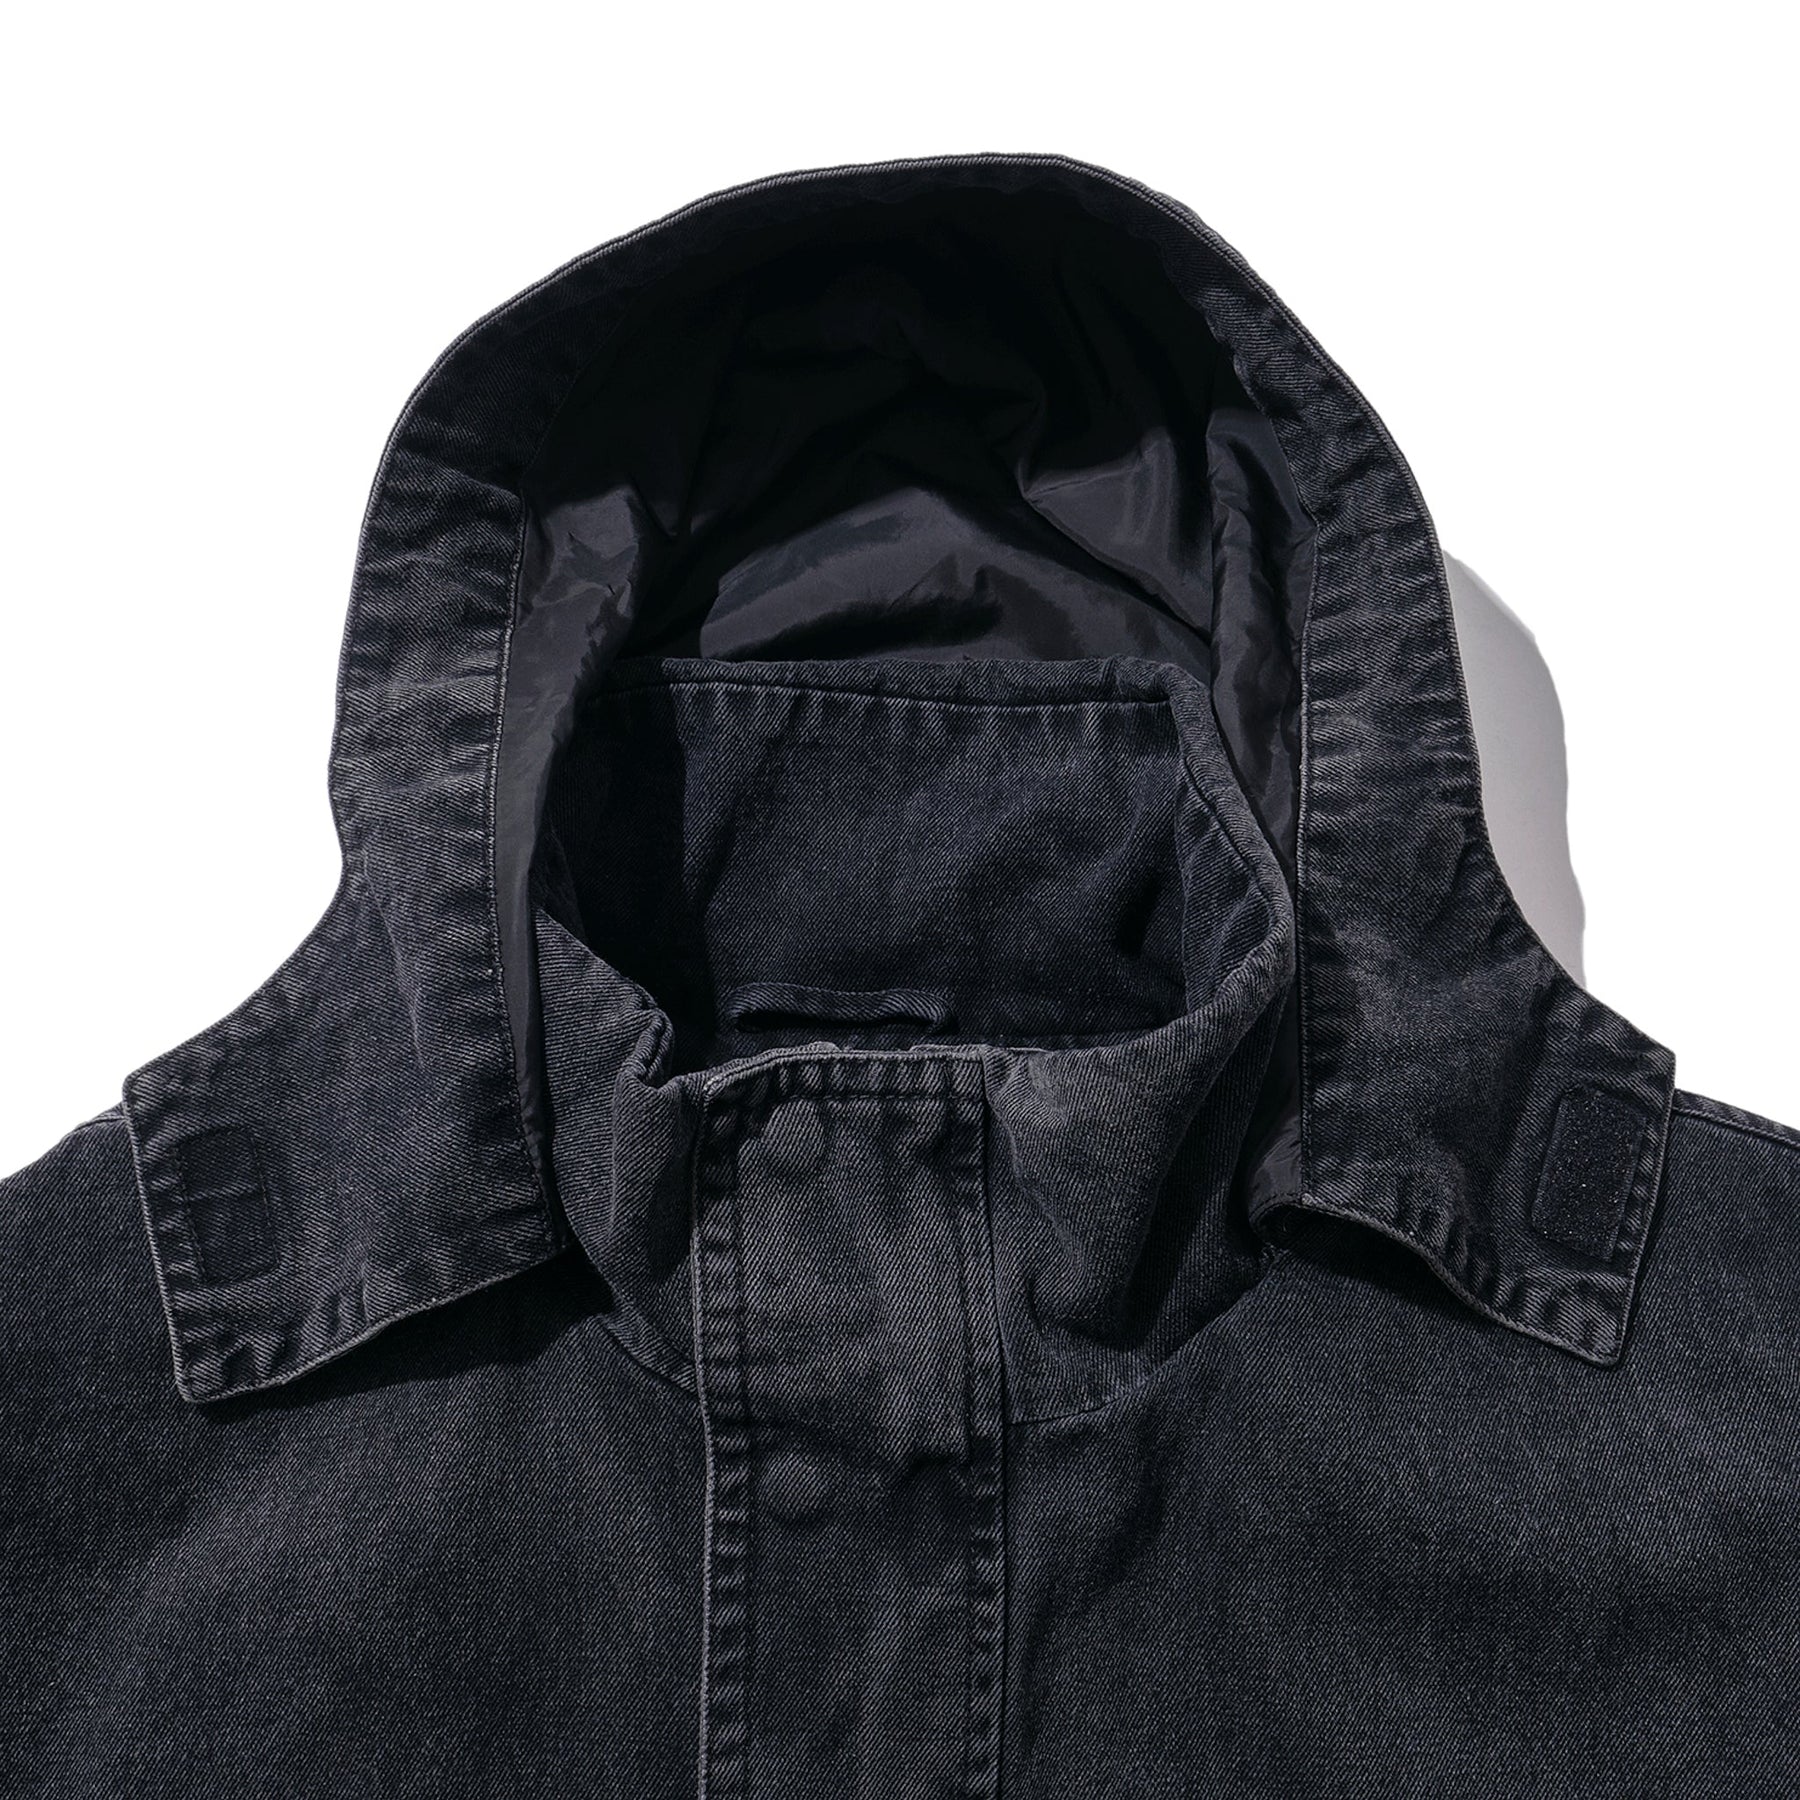 <span style="color: #f50b0b;">Last One</span> WILLY CHAVARRIA / MOUNTAIN PUFF JACKET WASHED BLACK